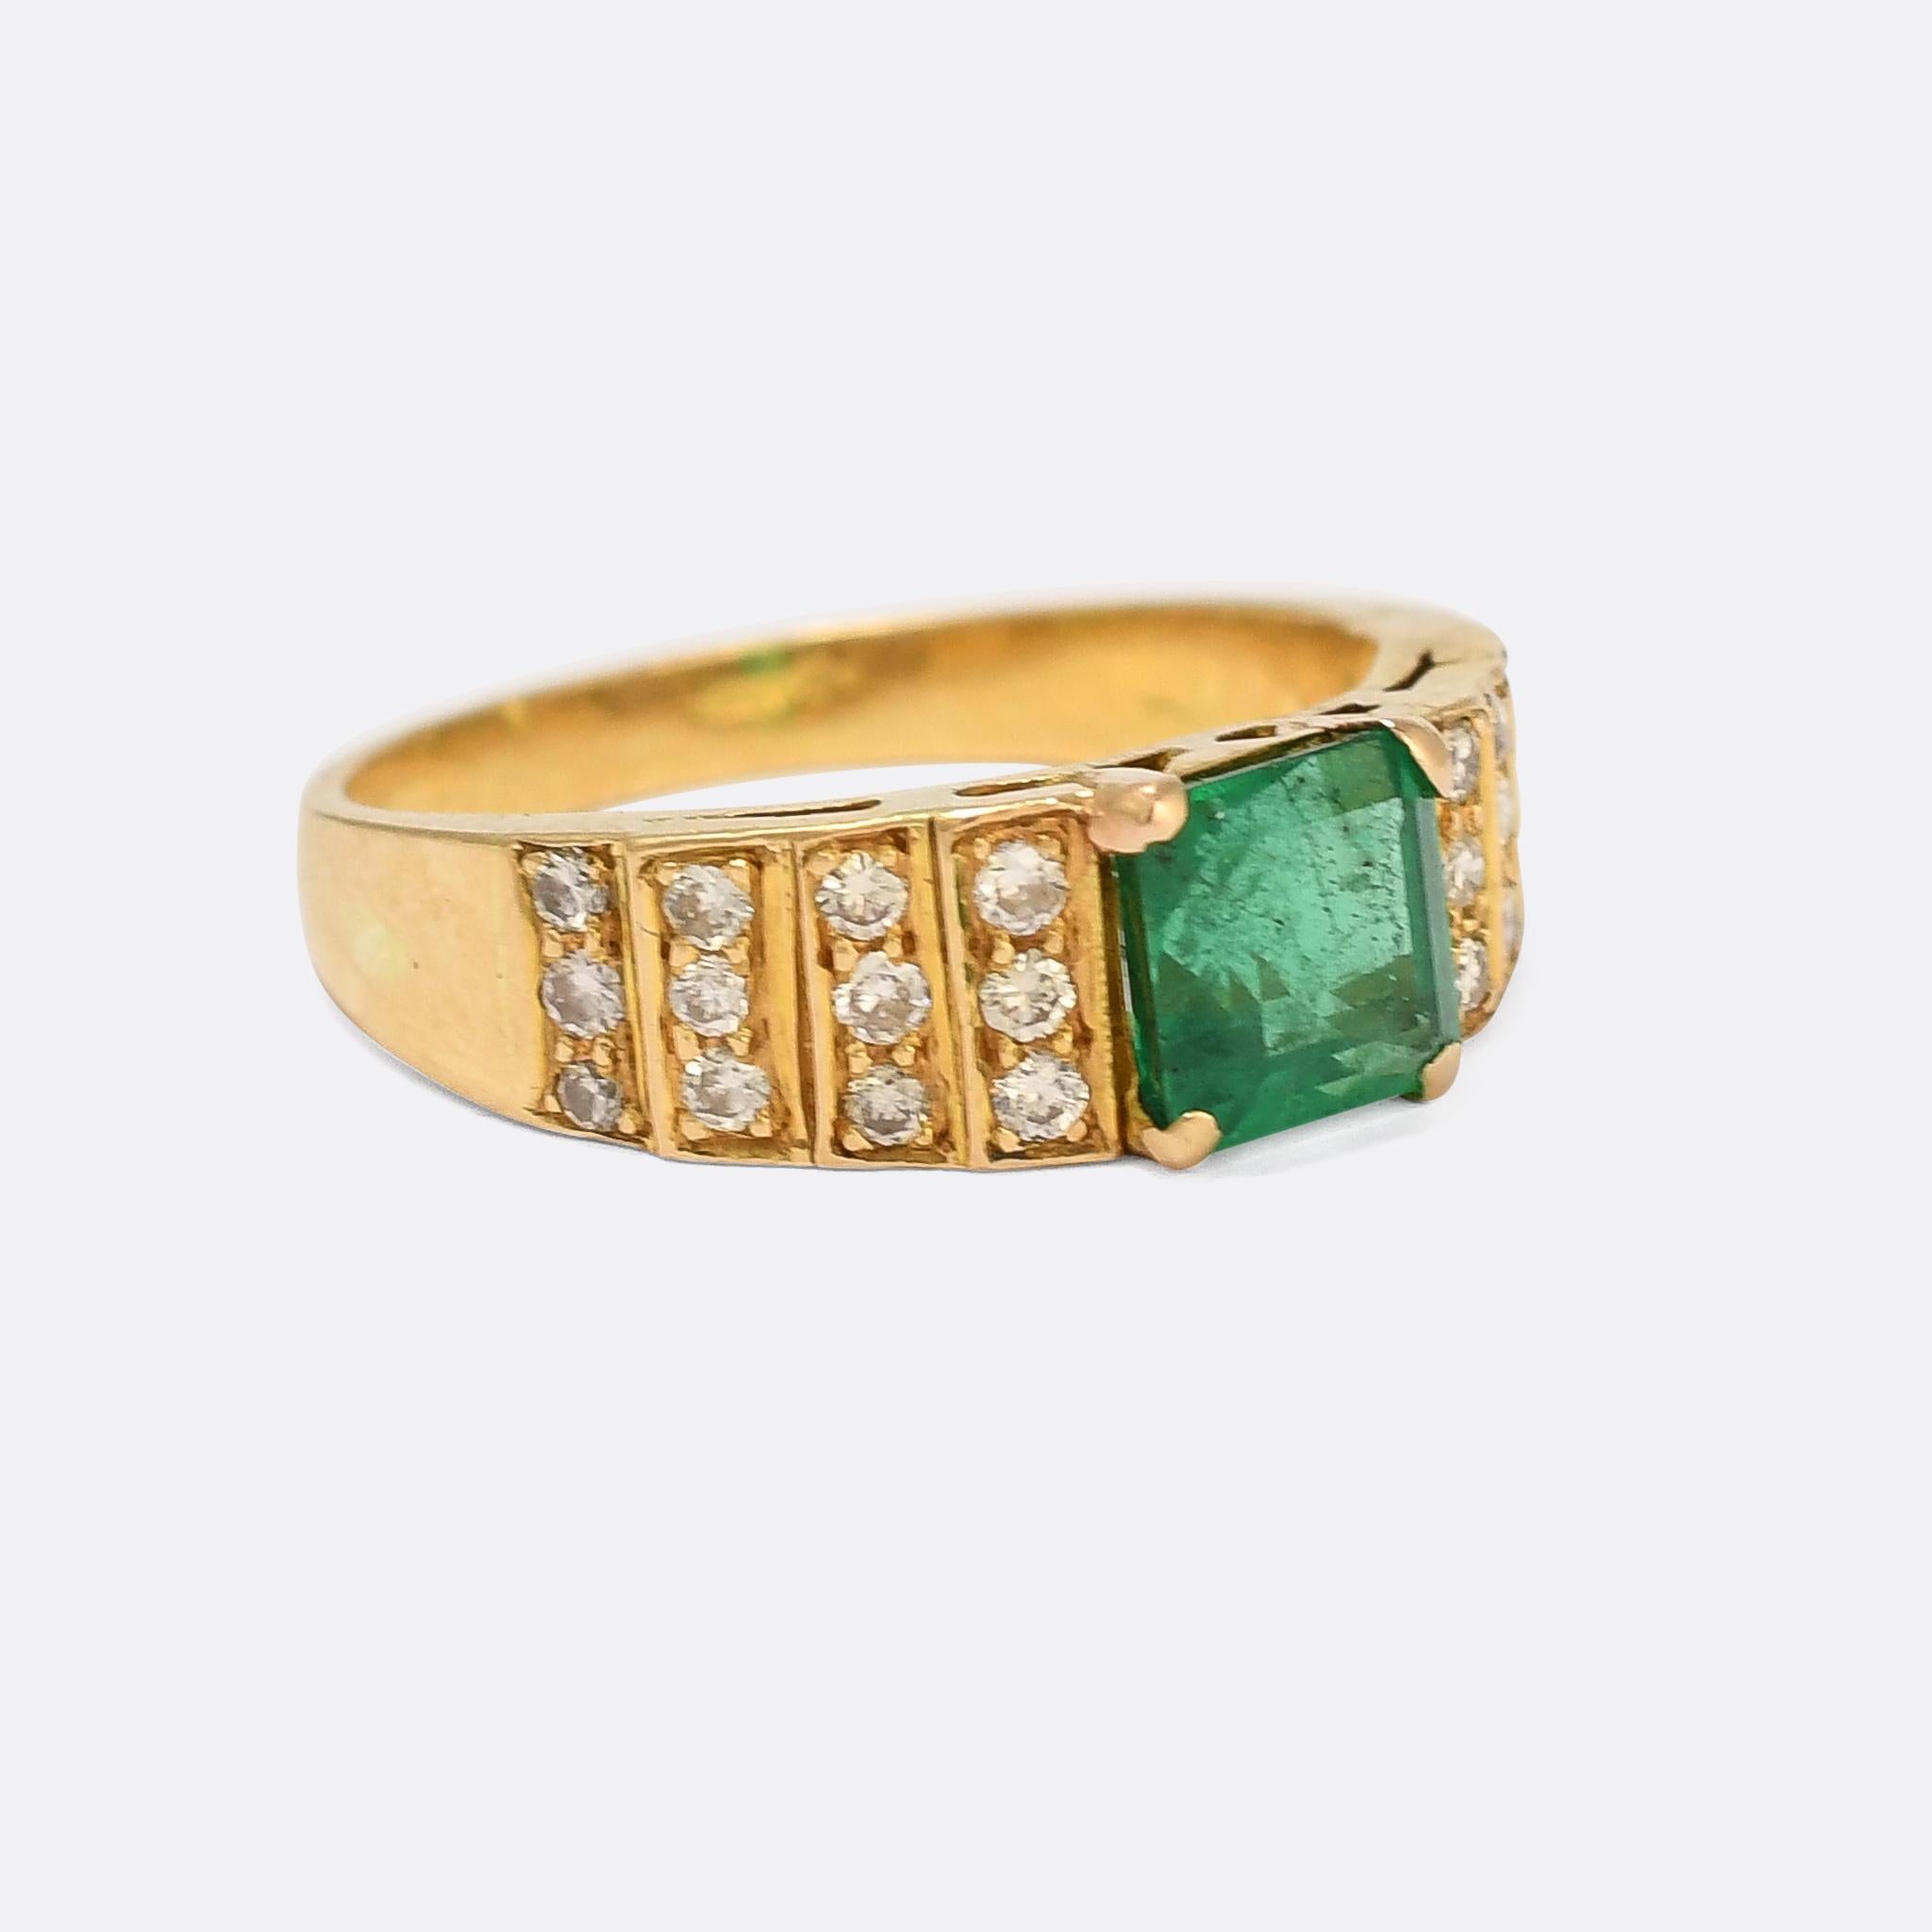 A stunning 1970s Art Deco Revival solitaire ring set with a central 1.28ct emerald flanked by diamond-set stepped shoulders. The principal stone is certified Zambian, and displays excellent colour and clariry - a subtle hint of blue adding depth to